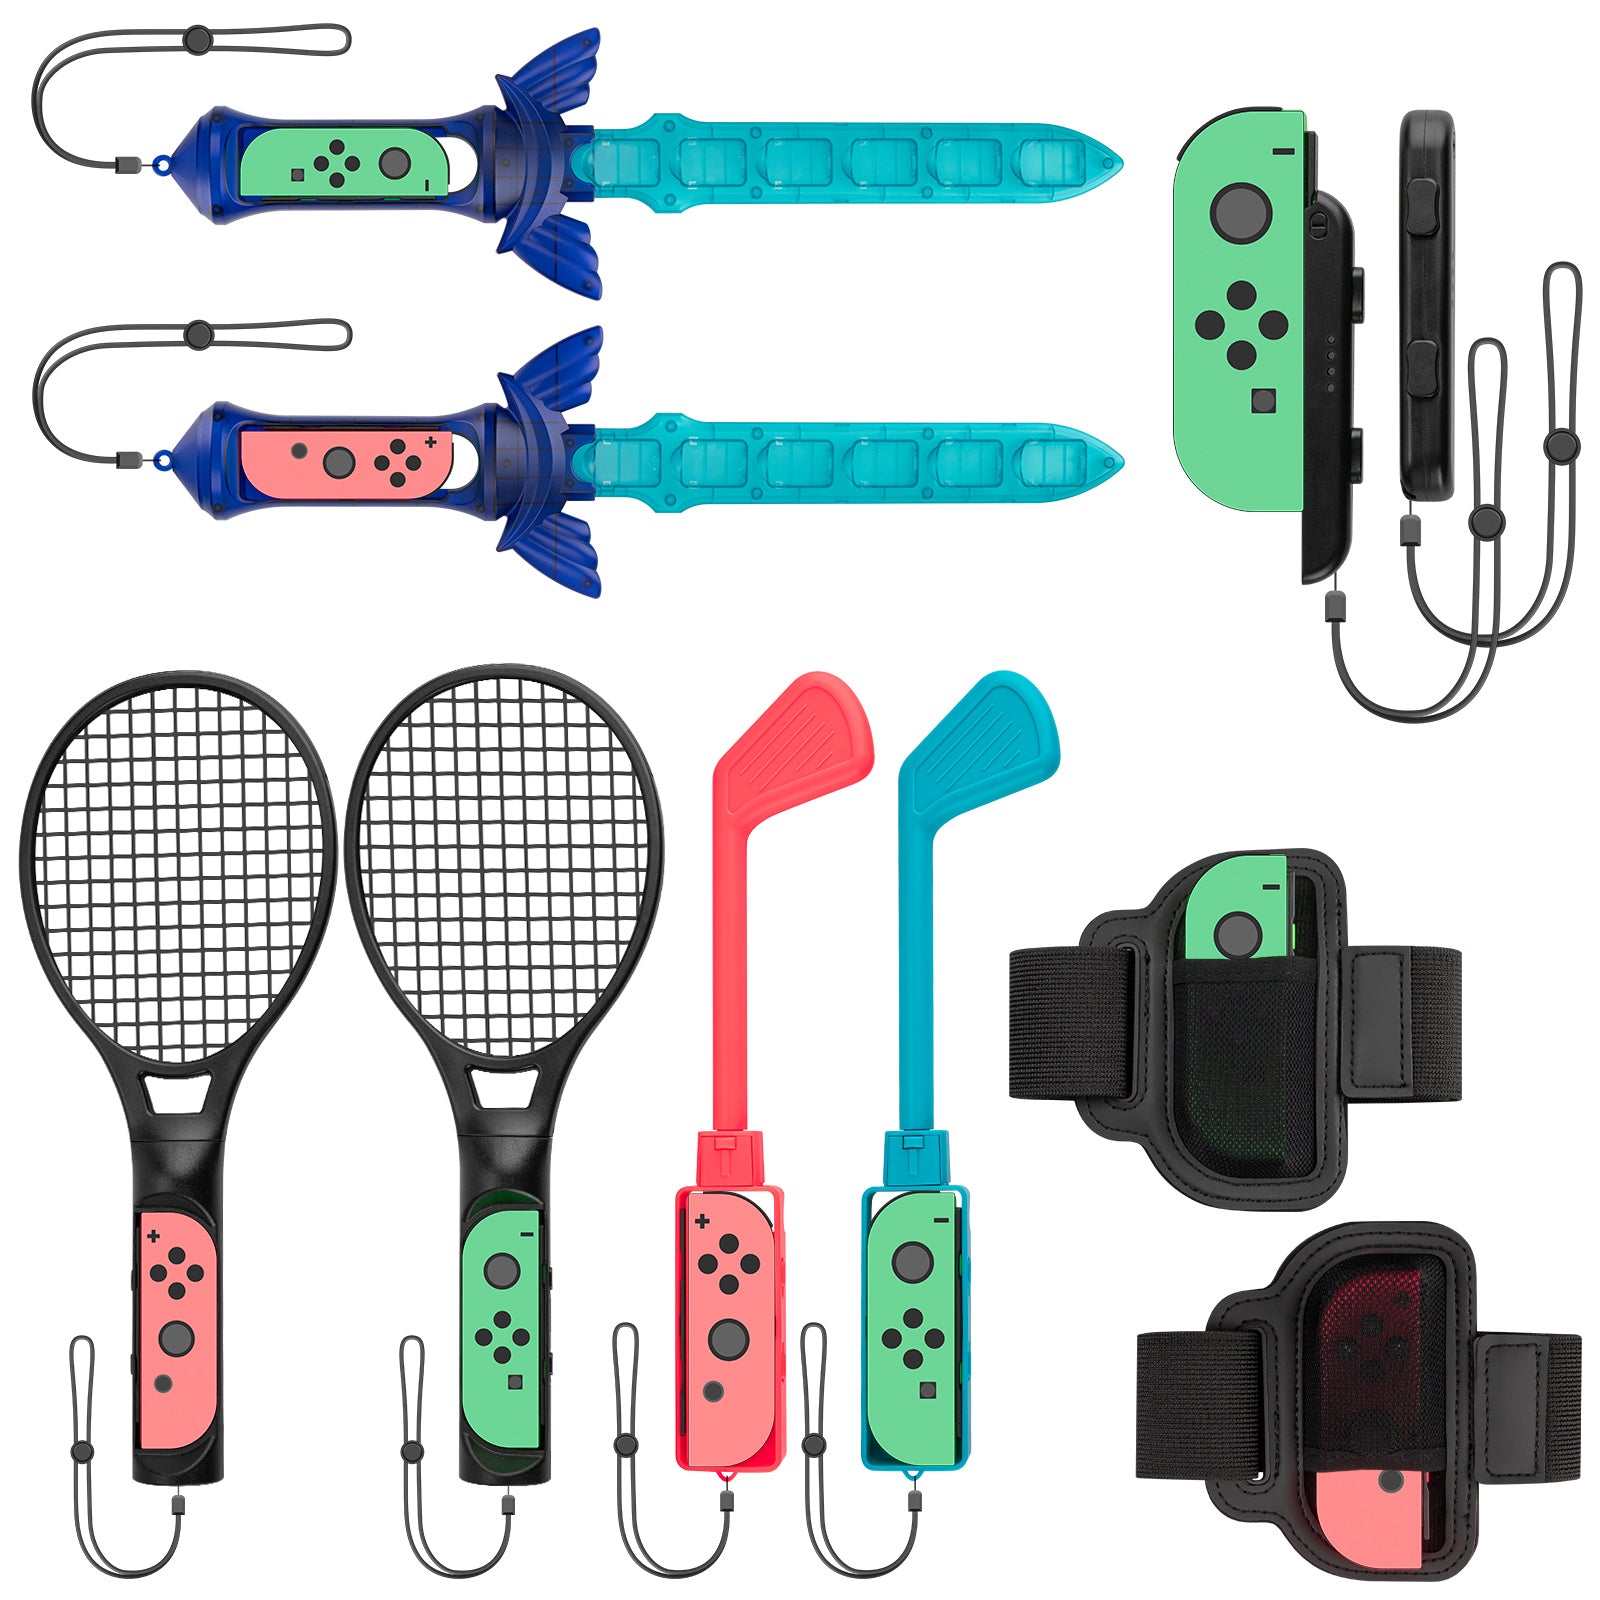 Wholesale Tennis Overgrips & Accessories for Tennis Players 